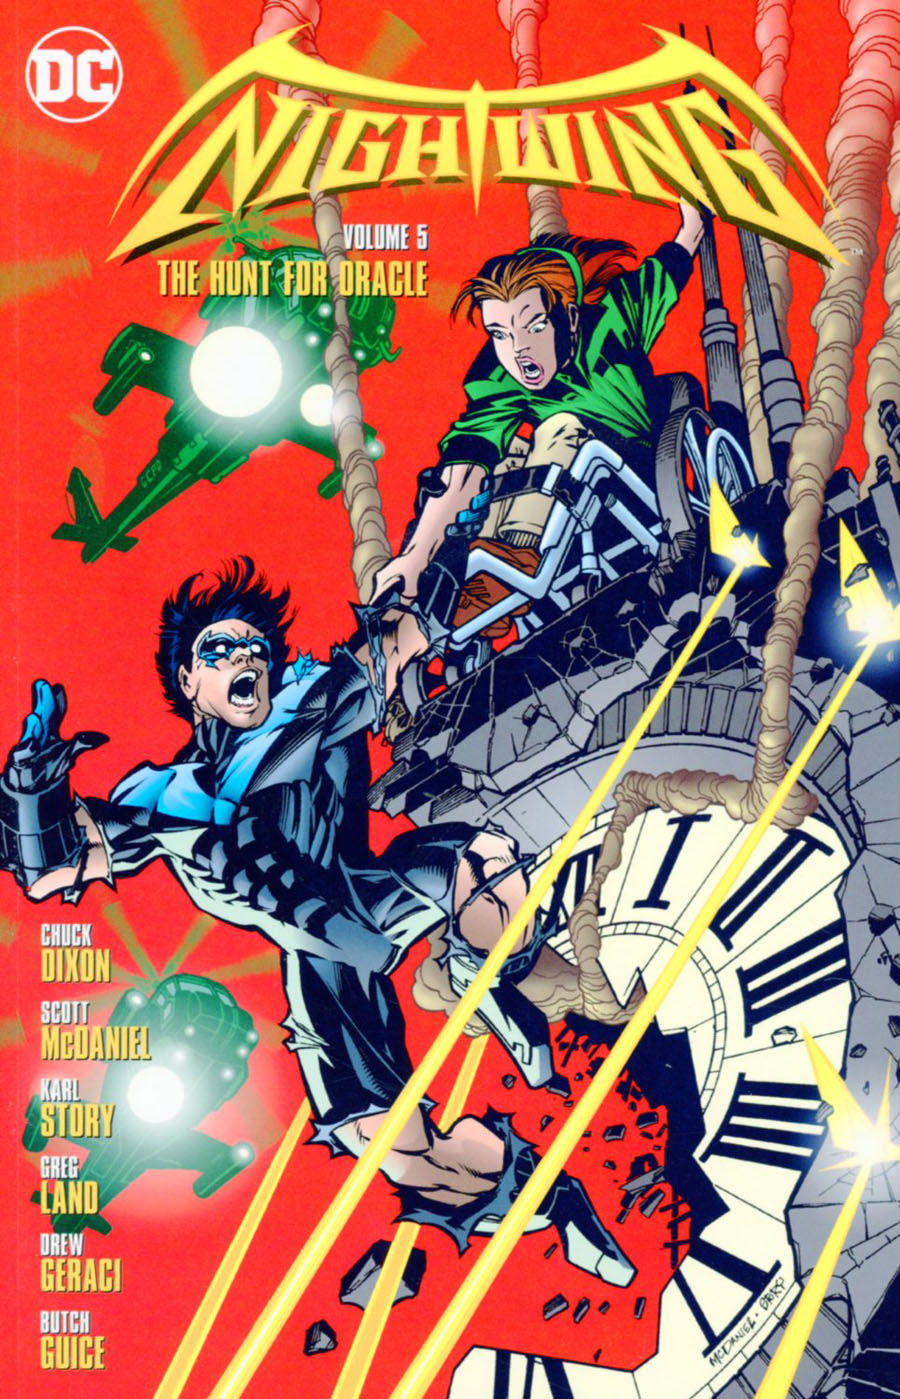 Nightwing Vol 5 The Hunt For Oracle TP